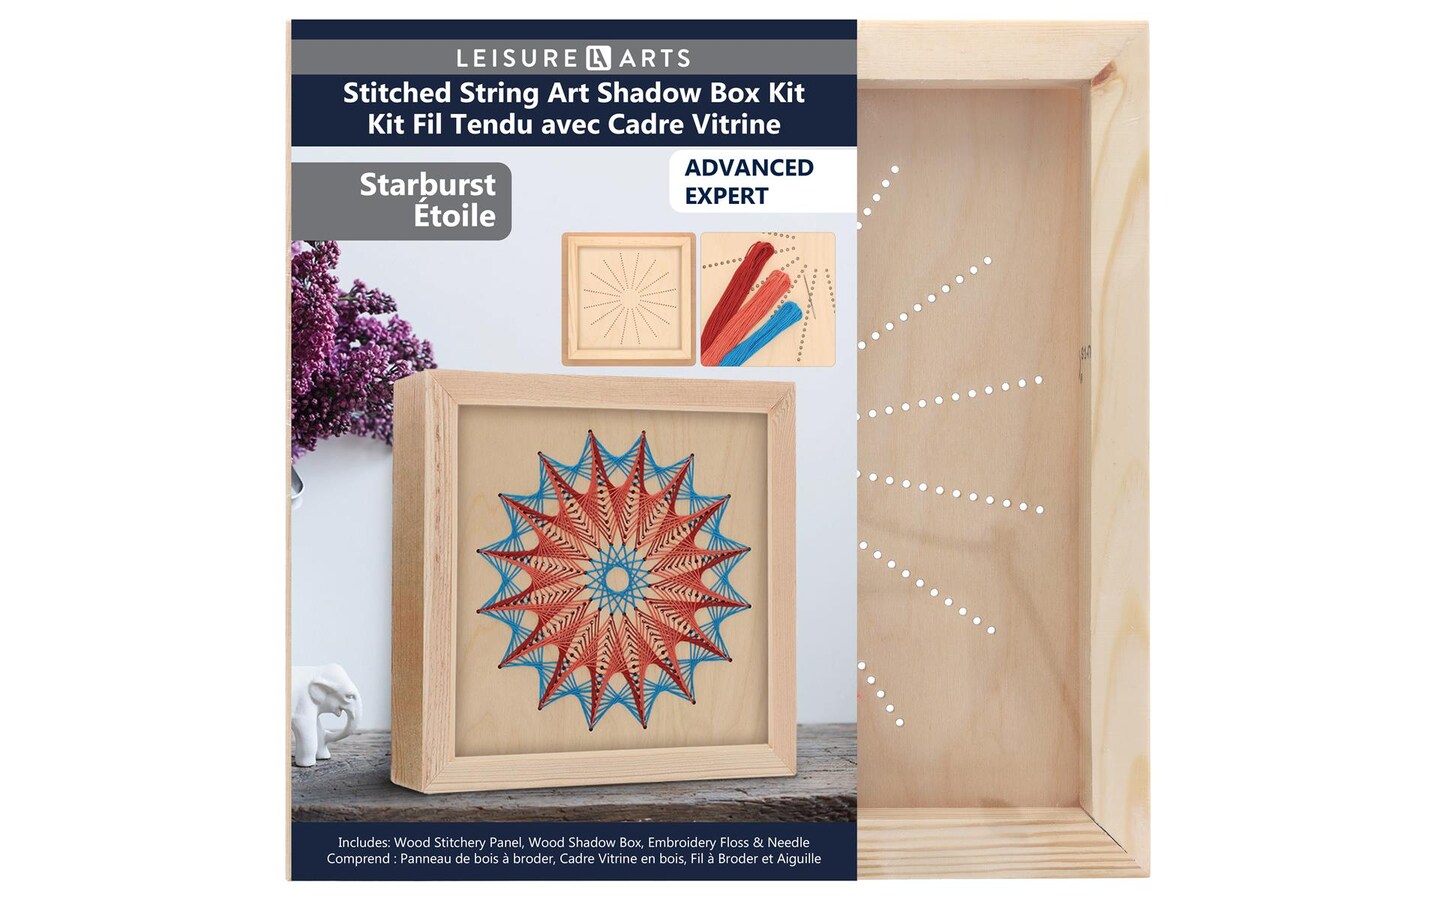 Wood Stitched String Art Kit with Shadow Box Starburst - adult or kids  craft - craft kits for teens - string art kit for adults - 3d string art -  3d